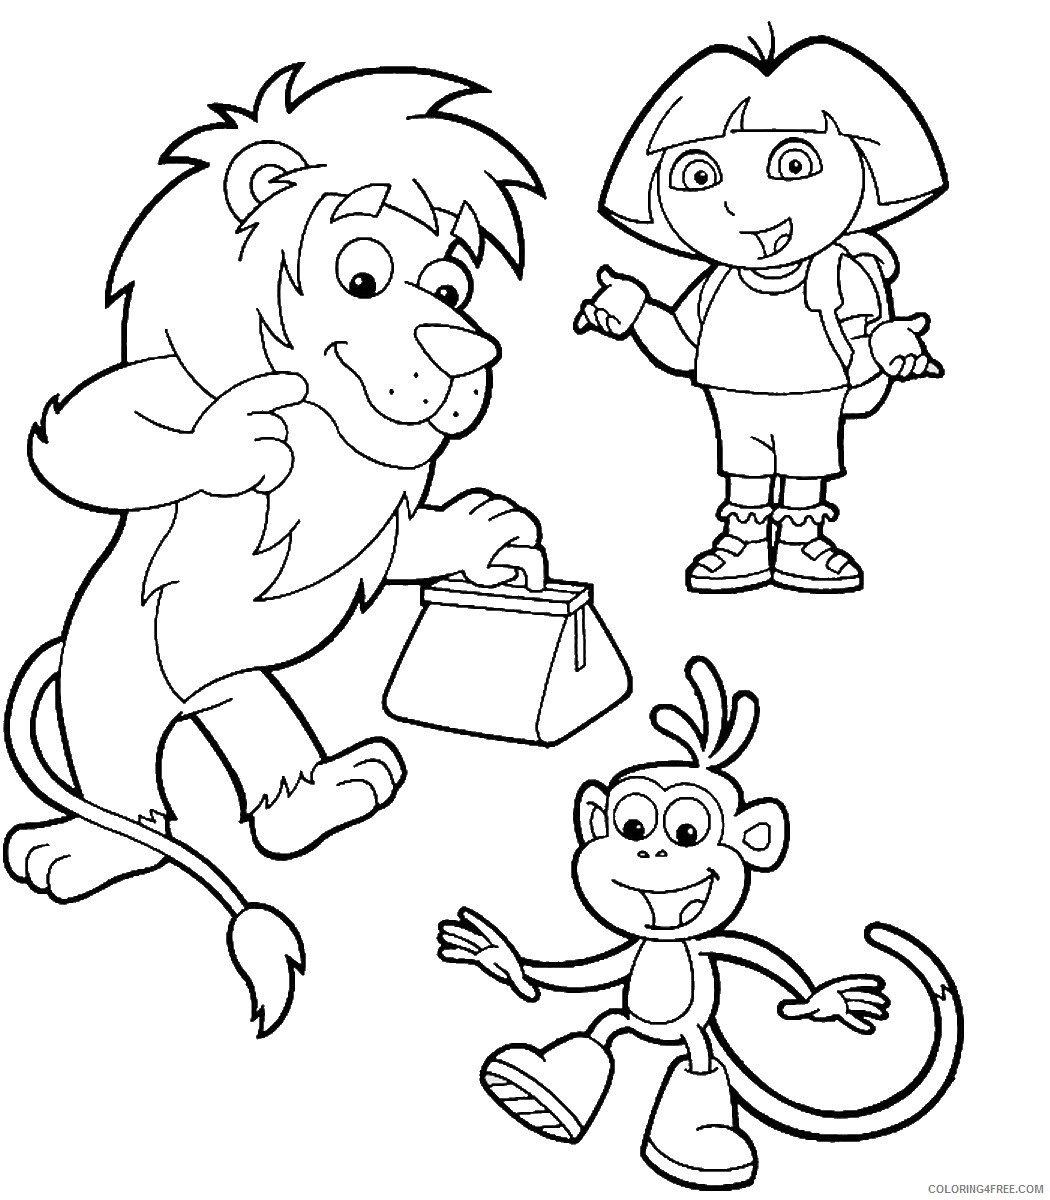 Dora the Explorer Coloring Pages Cartoons cl_dora49 Printable 2020 2633 Coloring4free